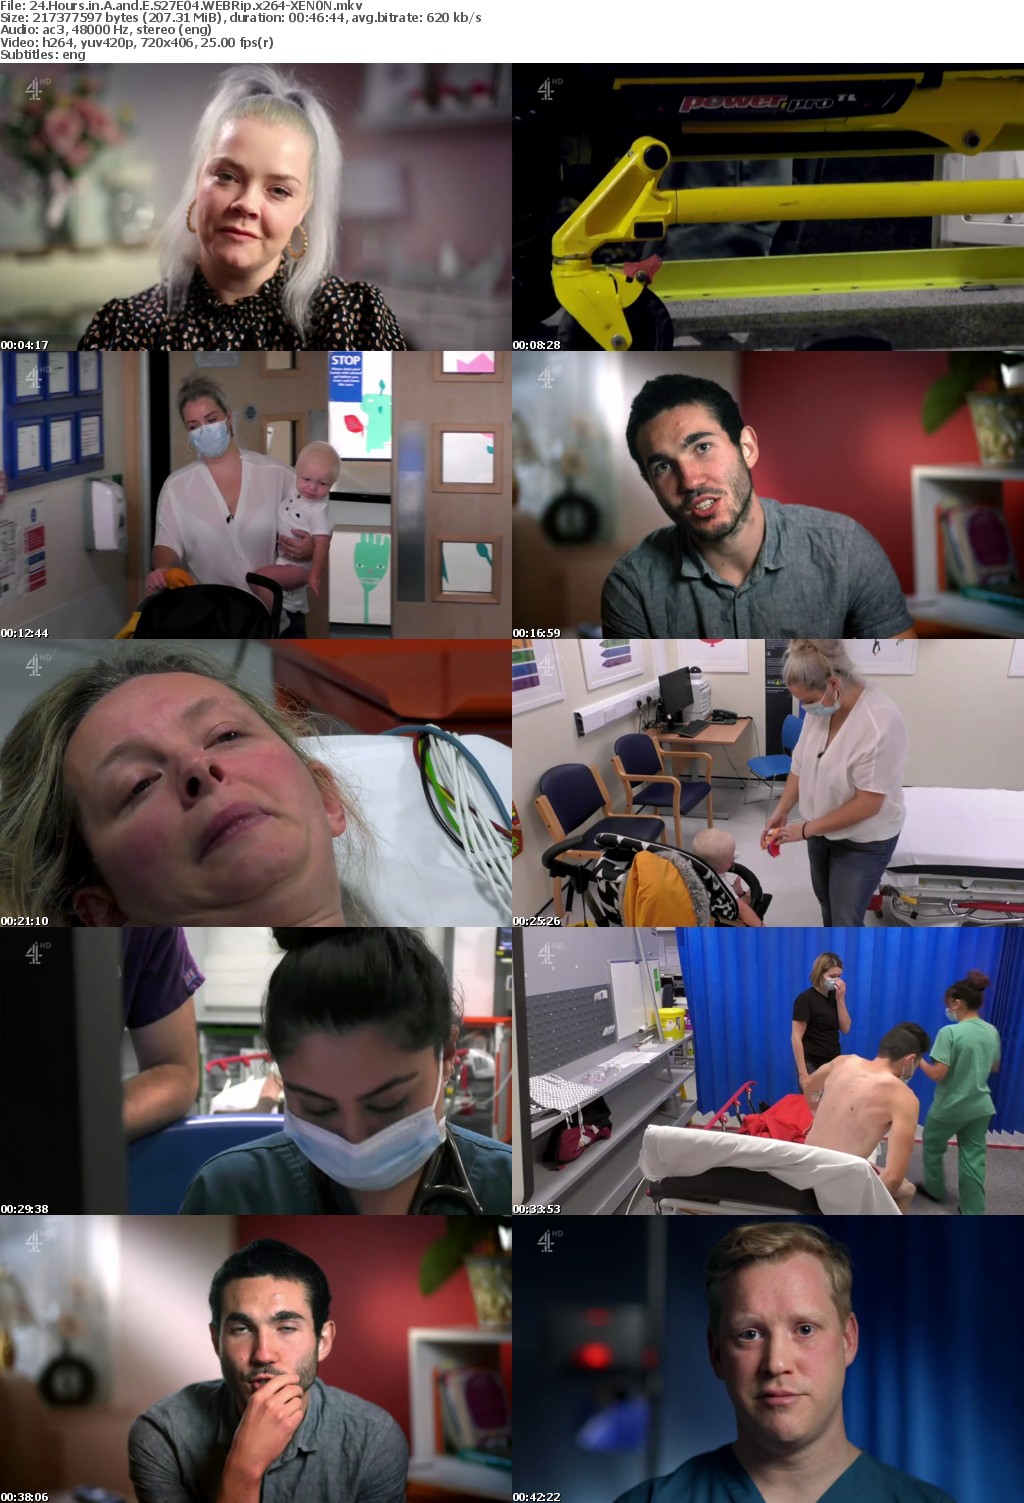 24 Hours in A and E S27E04 WEBRip x264-XEN0N